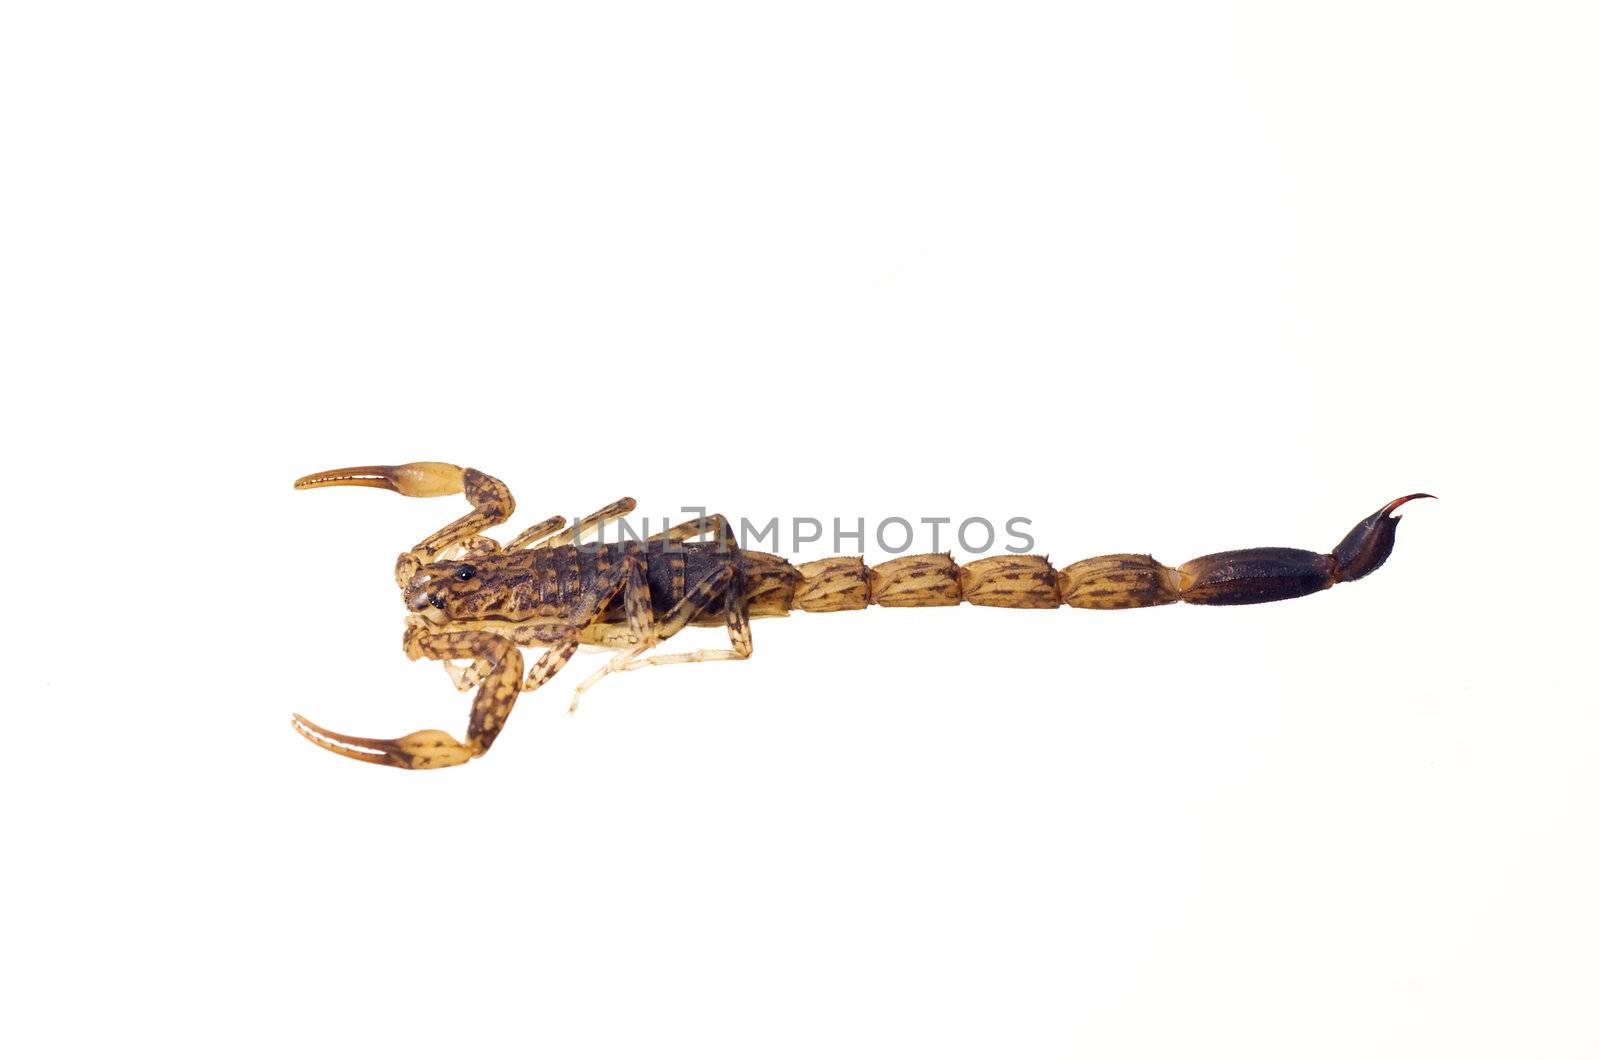 Scorpion isolated over white by Jaykayl